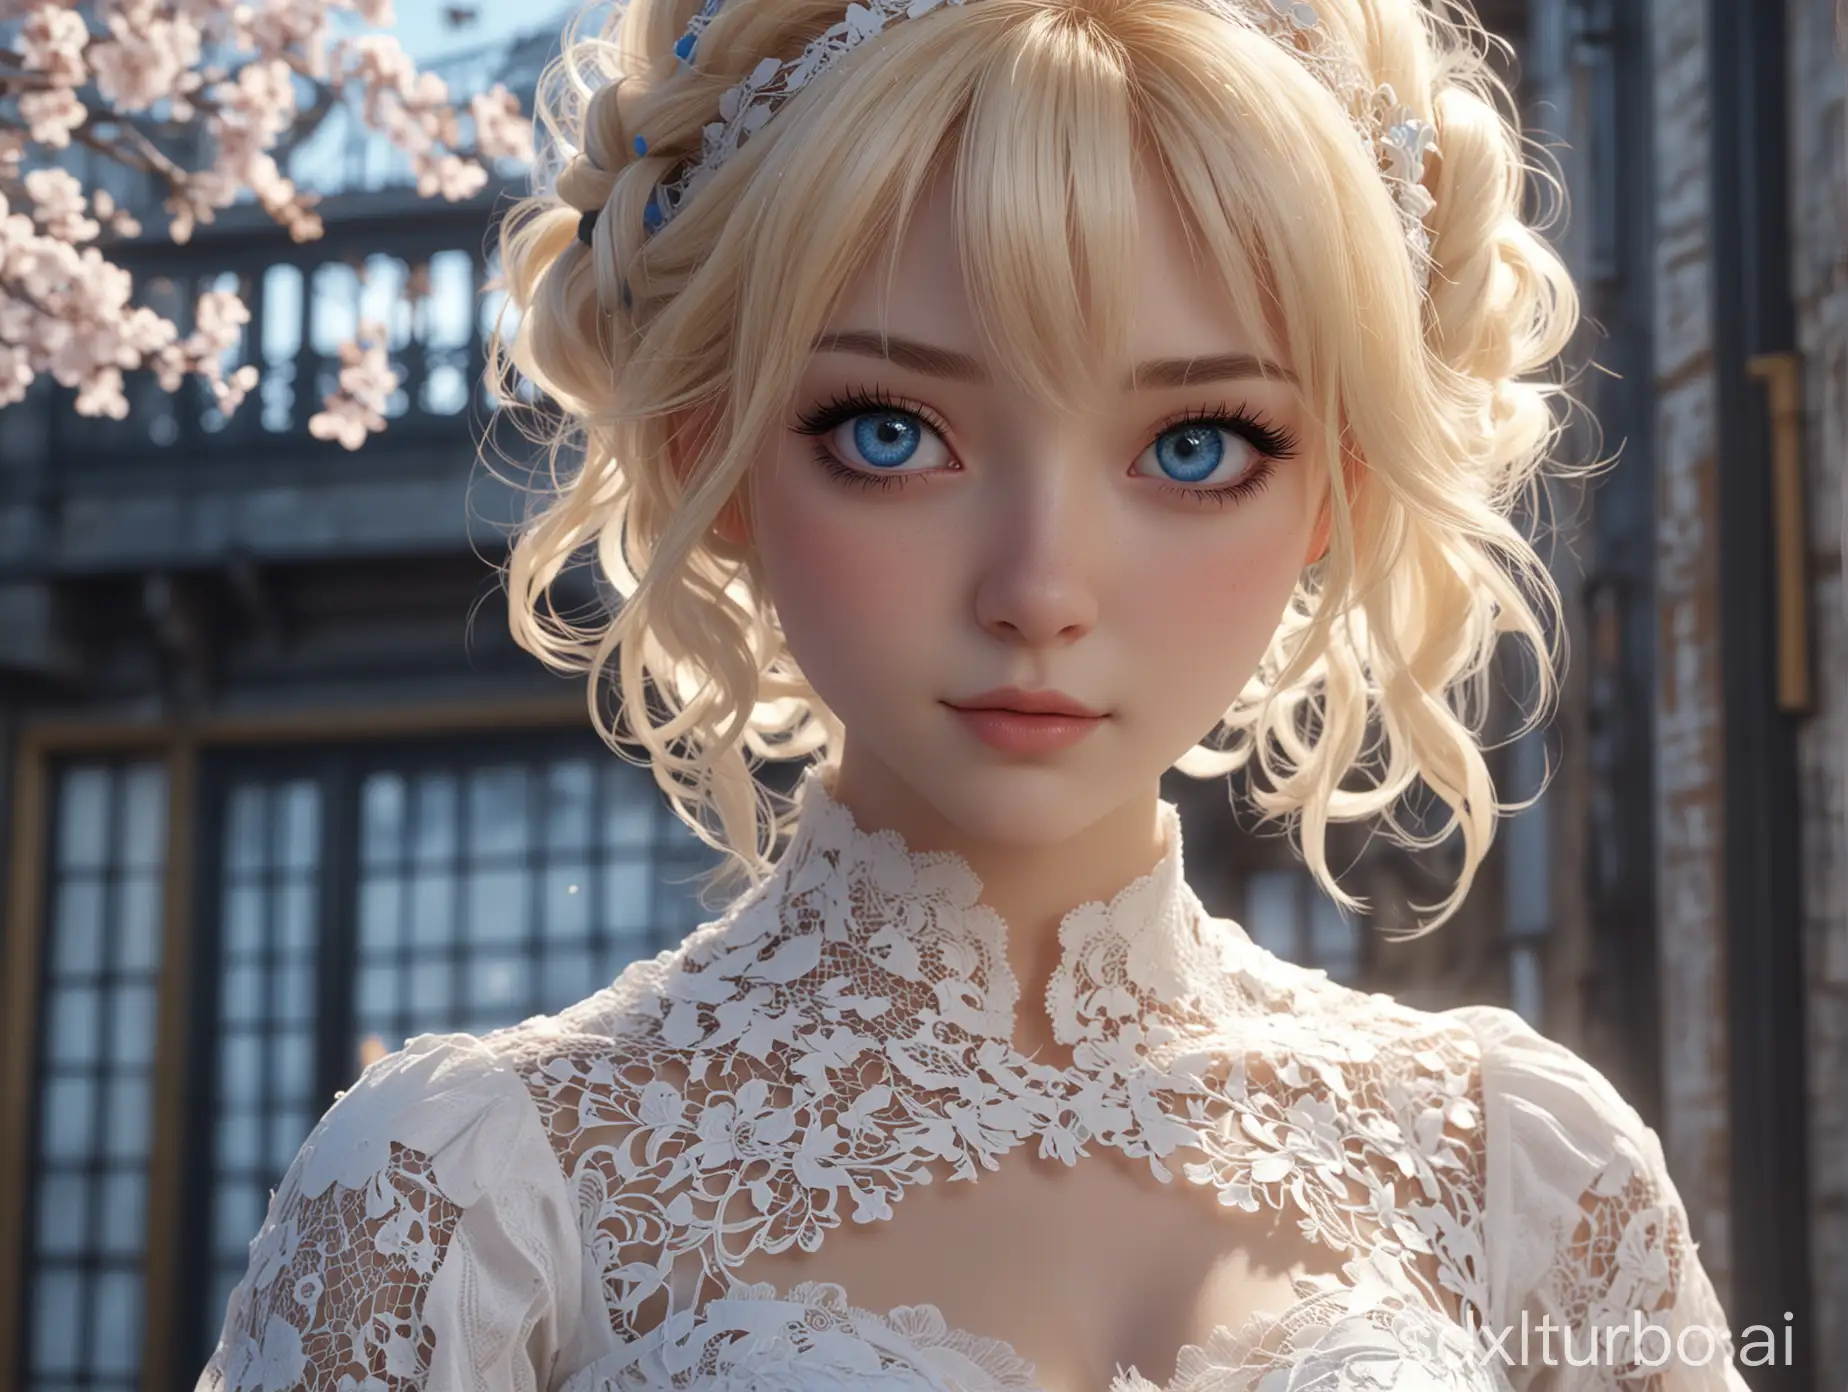 A young lady with blue eyes, long black lashes, long, luscious blonde hair, and a white lace dress. Happy, Artist Junko Mizuno style. anime, cool colors, technical background, hight bright, extremely detailed, extremely deep background, final quality render, HDR, extremely detailed font, hight light, 8K, 3d render, photo  A stunningly detailed 8K render of a young anime lady with captivating blue eyes, long black lashes, and cascading blonde hair. She is dressed in an elegant white lace dress adorned with intricate designs. The background showcases a vibrant and technical landscape with cool colors, featuring a mix of futuristic and natural elements. The atmosphere is filled with high-contrast light and shadows, creating a sense of depth and dimension. The overall effect is a happy, whimsical scene, accentuated by the artist's signature Junko Mizuno style and the use of HDR for a truly immersive experience., photo, 3d render